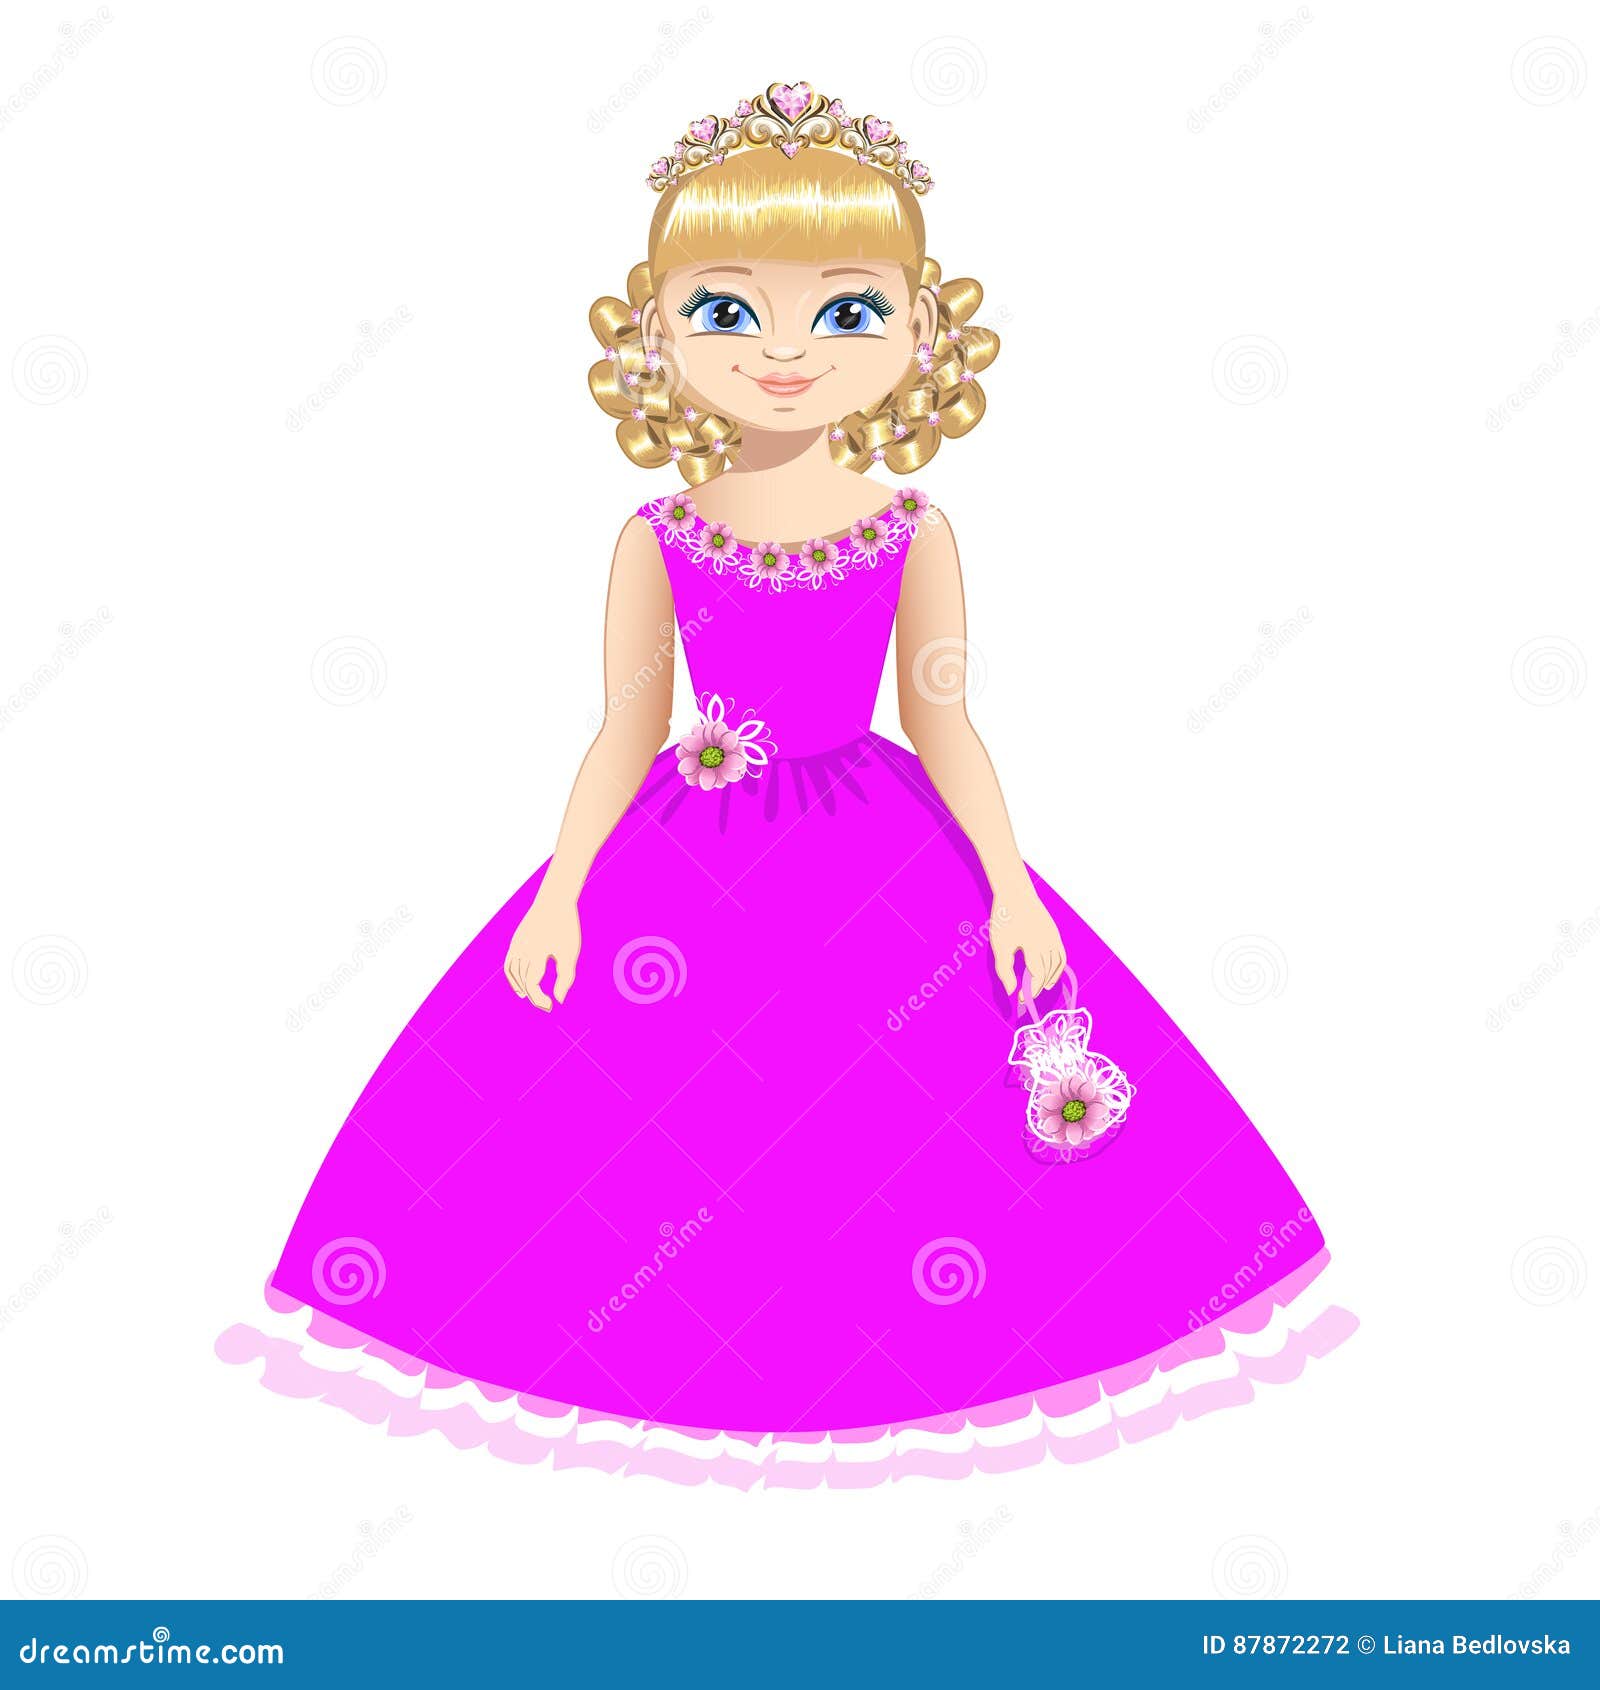 Beautiful Princess with Diadem Stock Vector - Illustration of standing ...